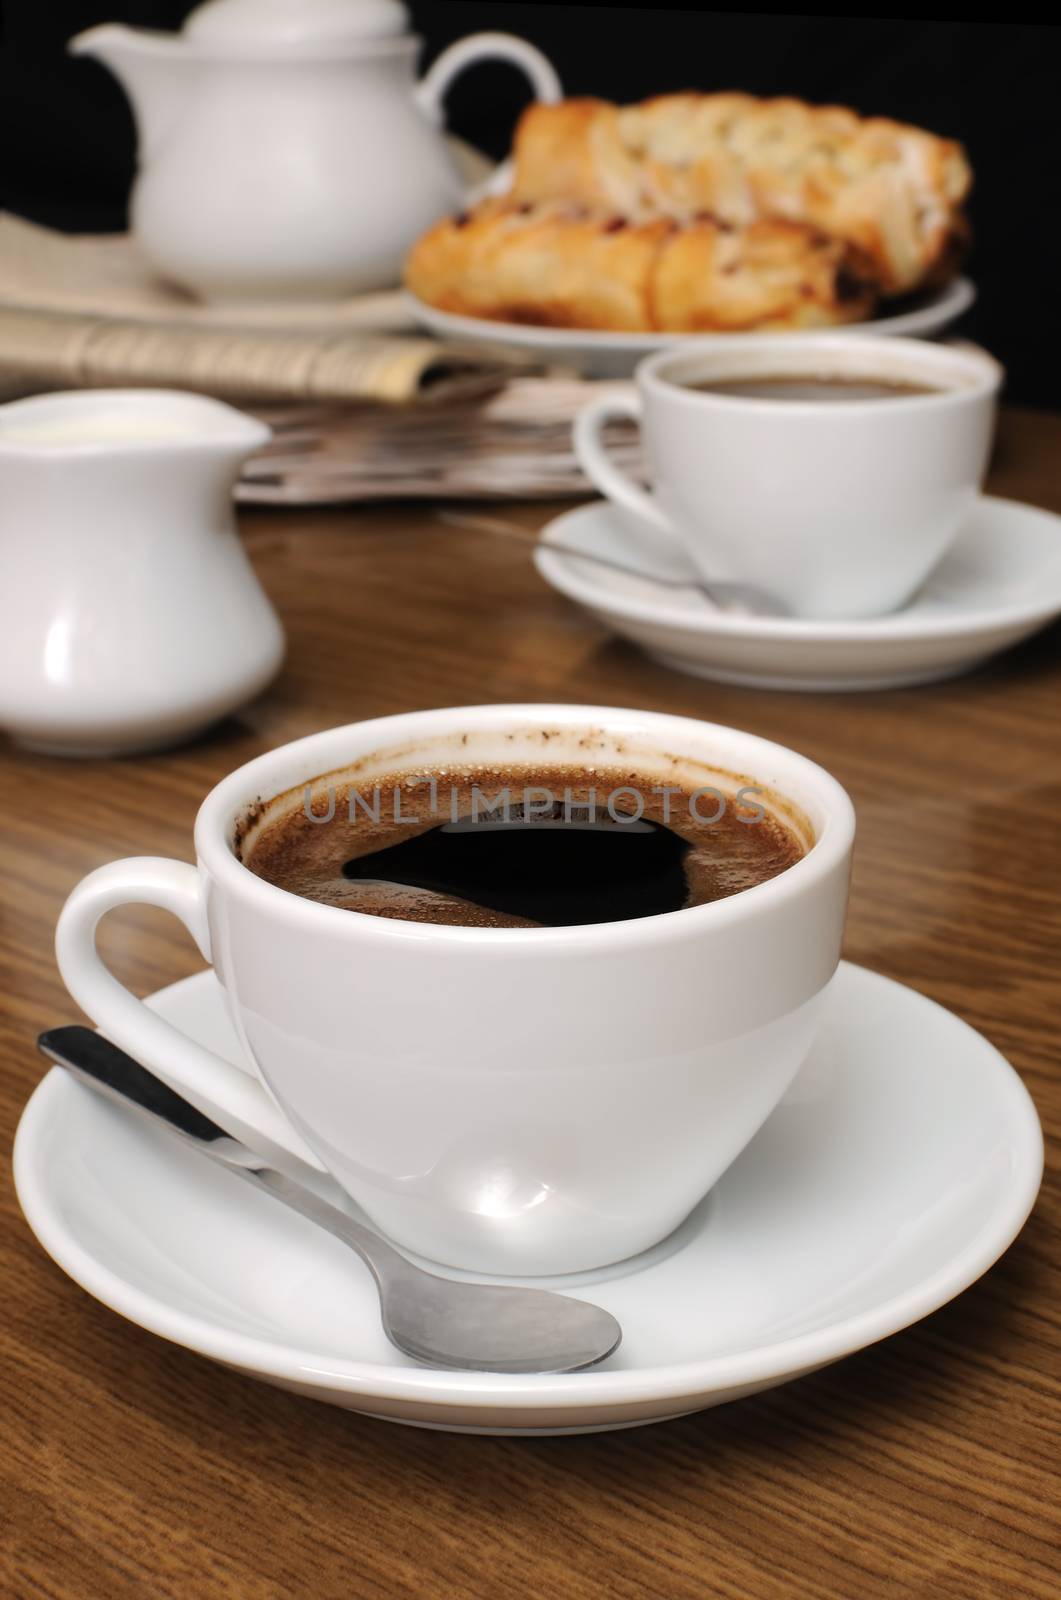  Cup of black coffee on the table with the milkman and biscuits on a tray with newspaper